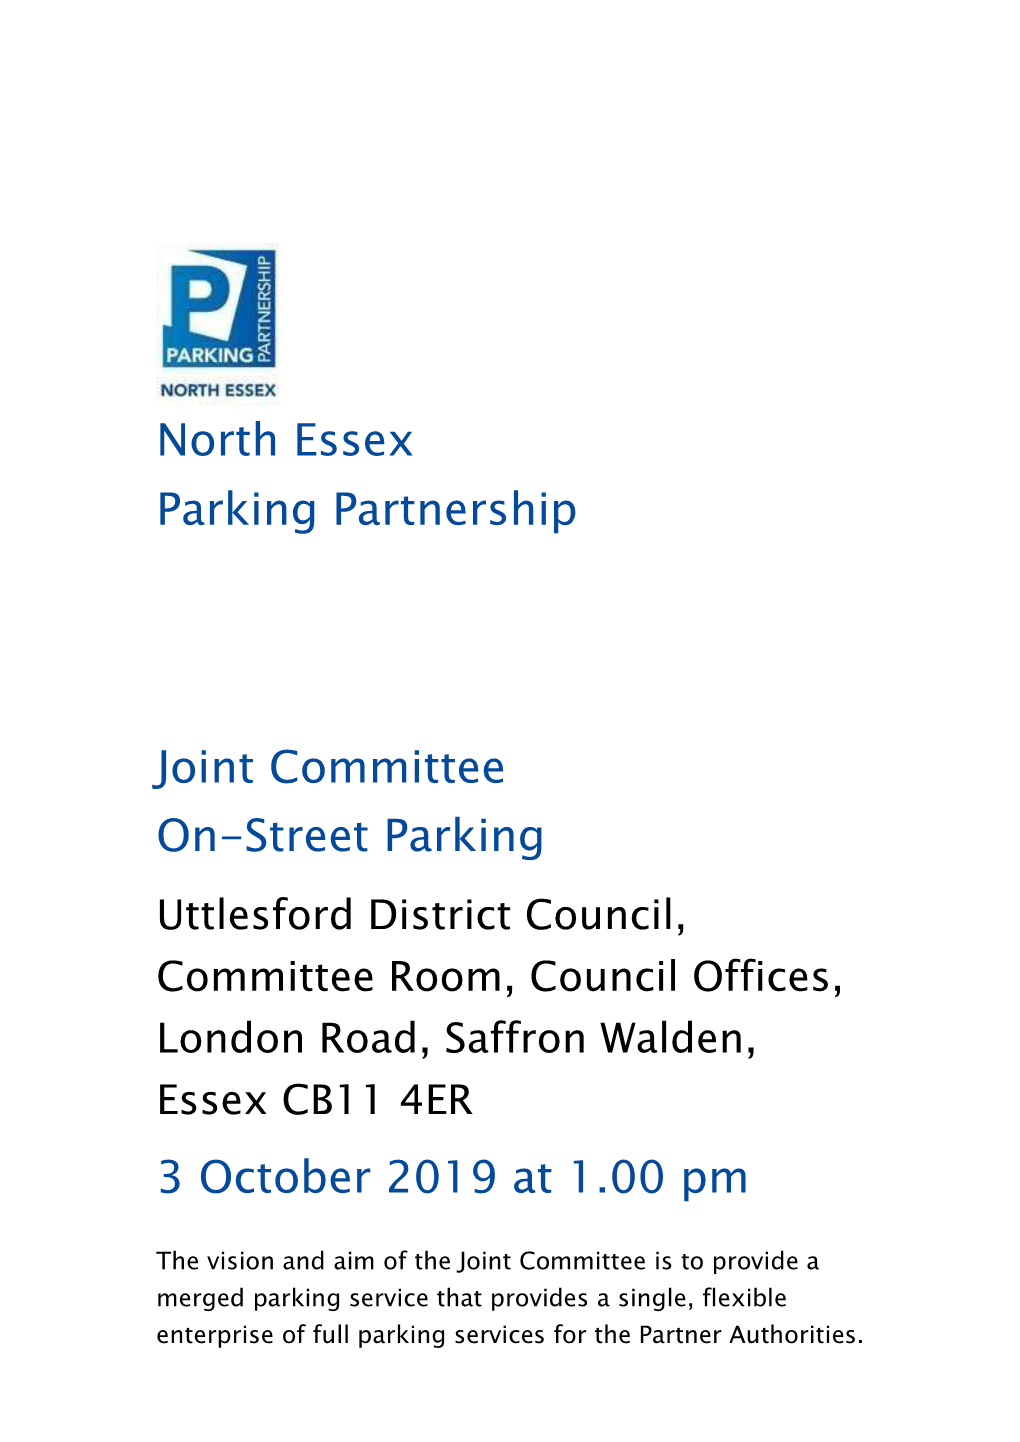 North Essex Parking Partnership Joint Committee On-Street Parking 3